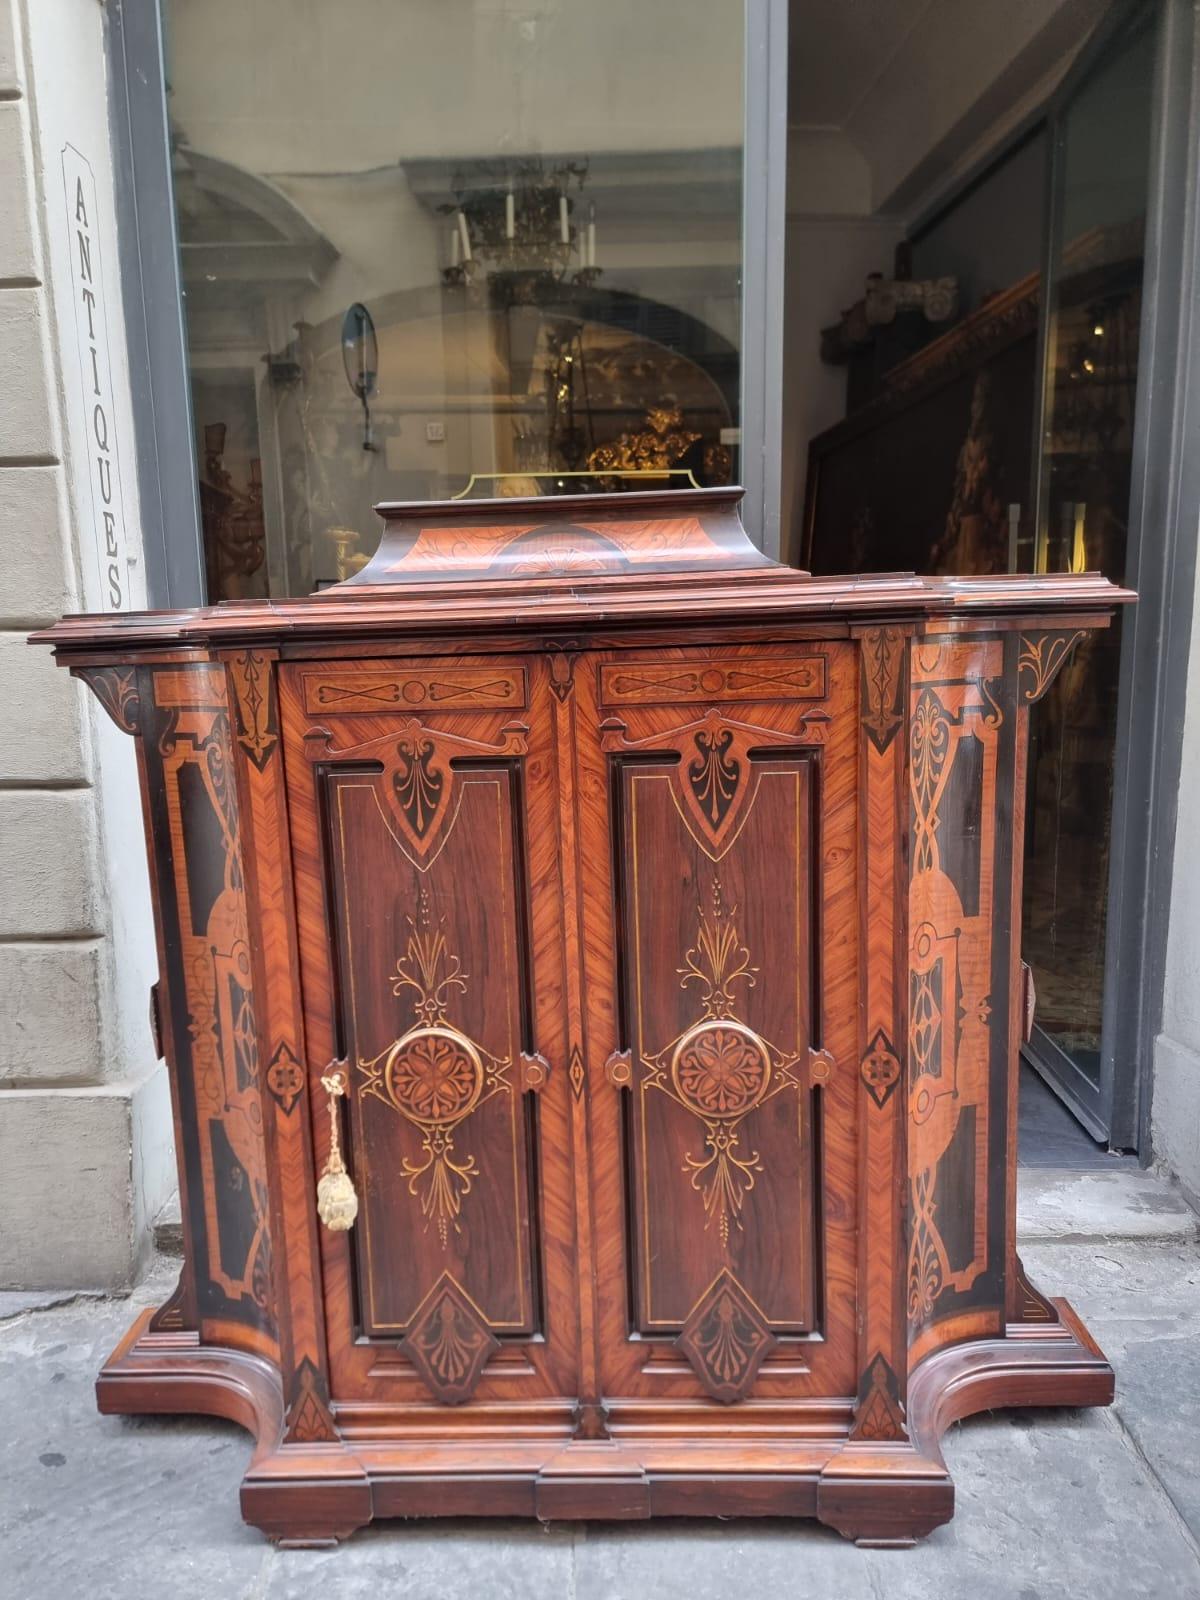 Very rare sideboard with riser, moved on the sides. The cabinet has a door on the front and is threaded and carved in rosewood and bois de rose. 

Extremely refined are the inlaid decorations throughout the cabinet, late 19th and early 20th